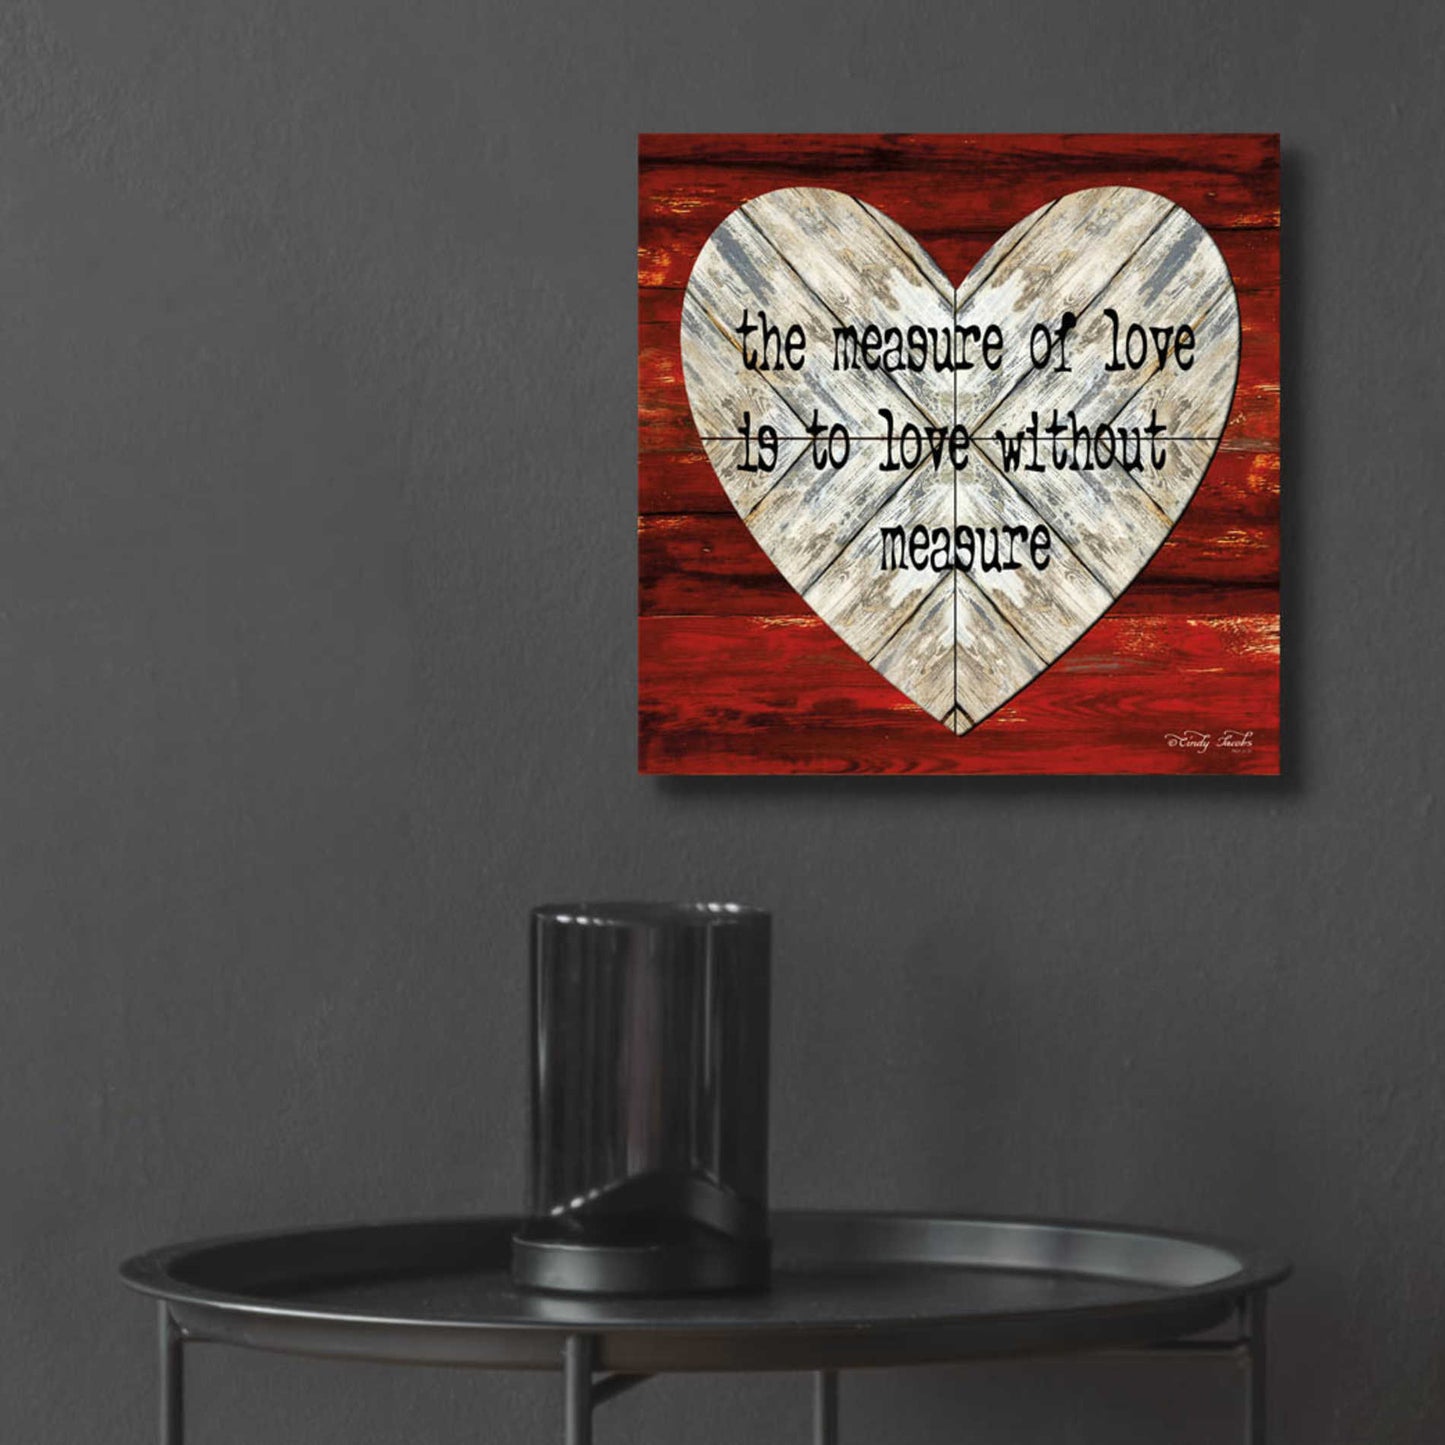 Epic Art 'The Measure of Love' by Cindy Jacobs, Acrylic Glass Wall Art,12x12